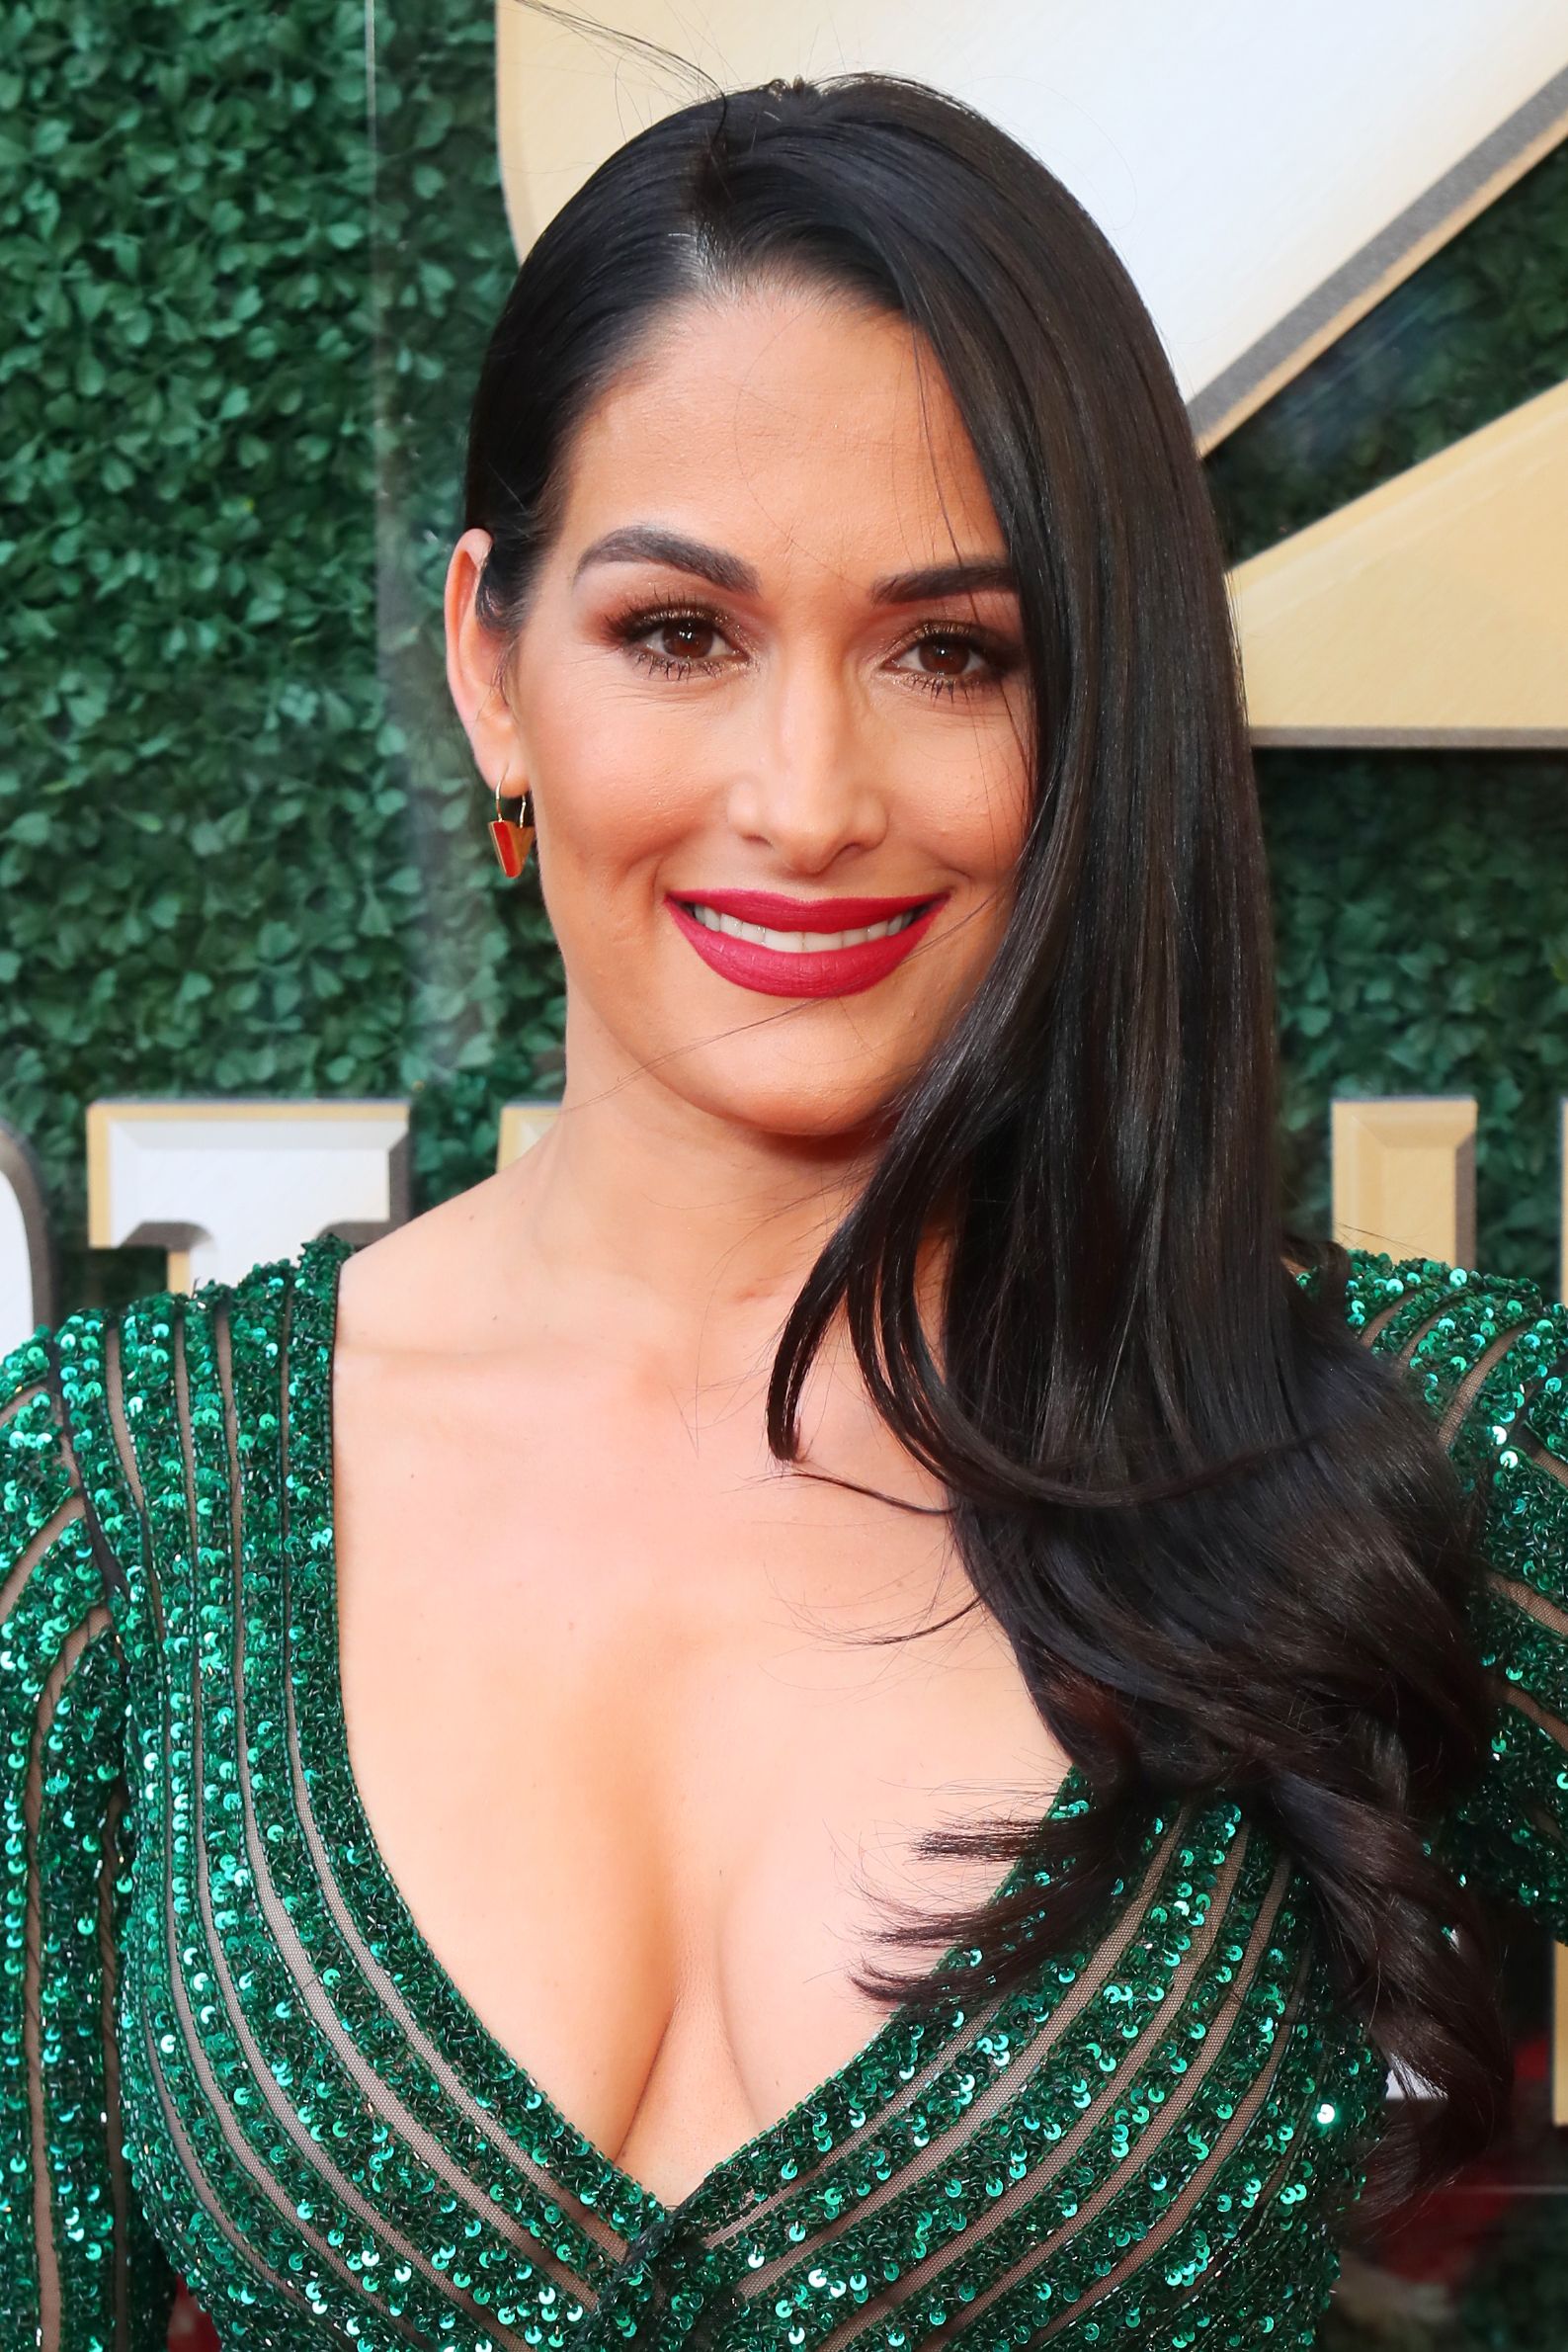 Wwe Sex Nikhi Bella Hd - Nikki Bella Is Officially Retiring From Wrestling And The WWE